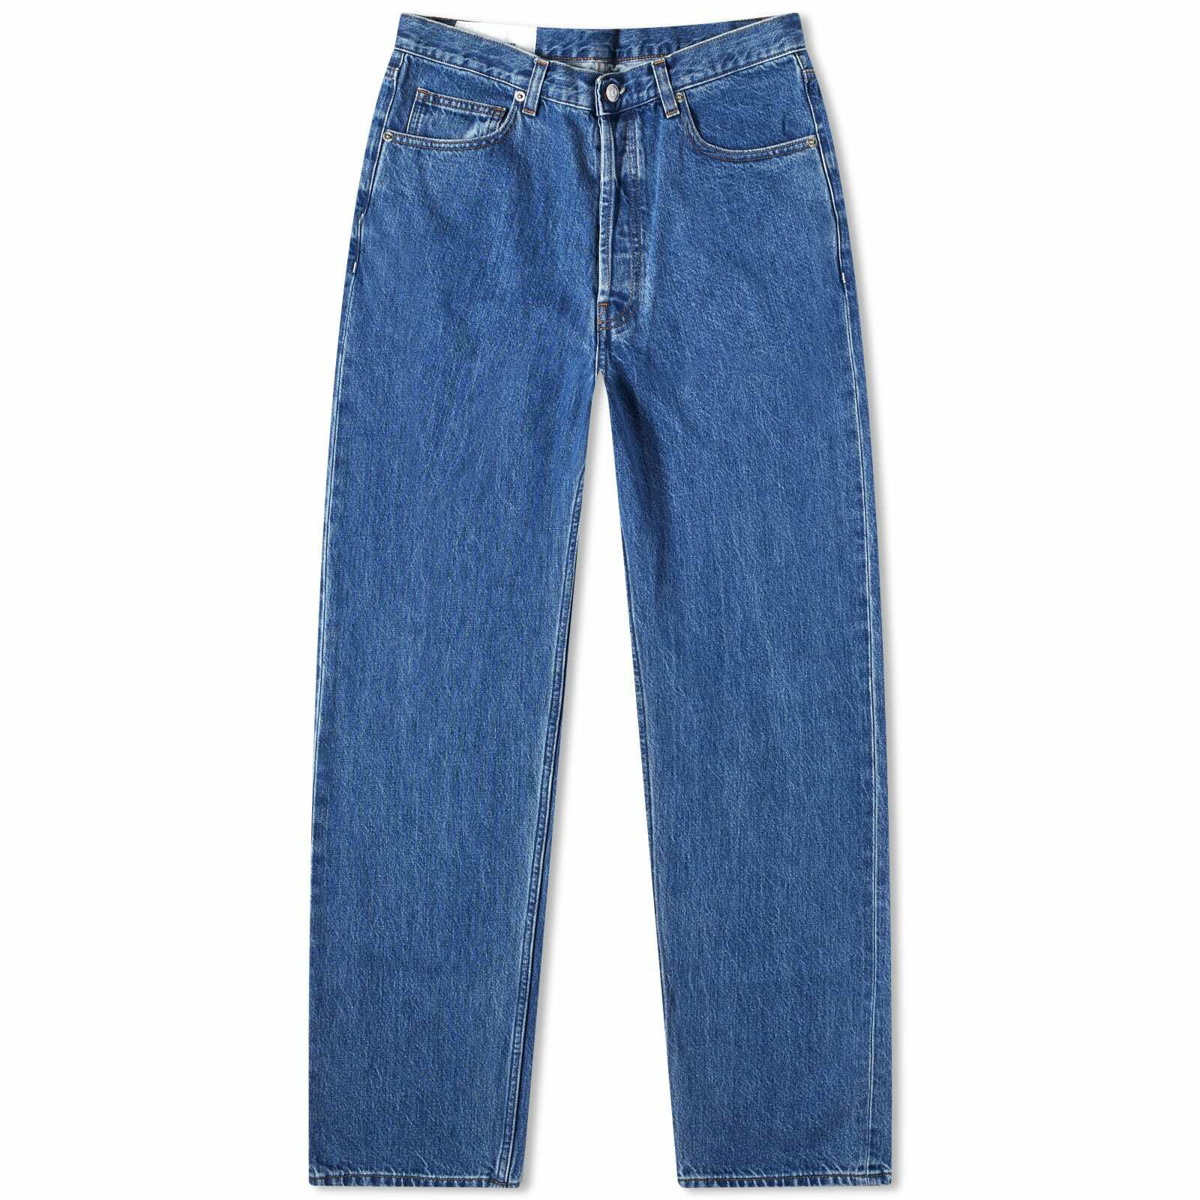 Norse Projects Men's Relaxed Denim Jeans in Vintage Indigo Norse Projects